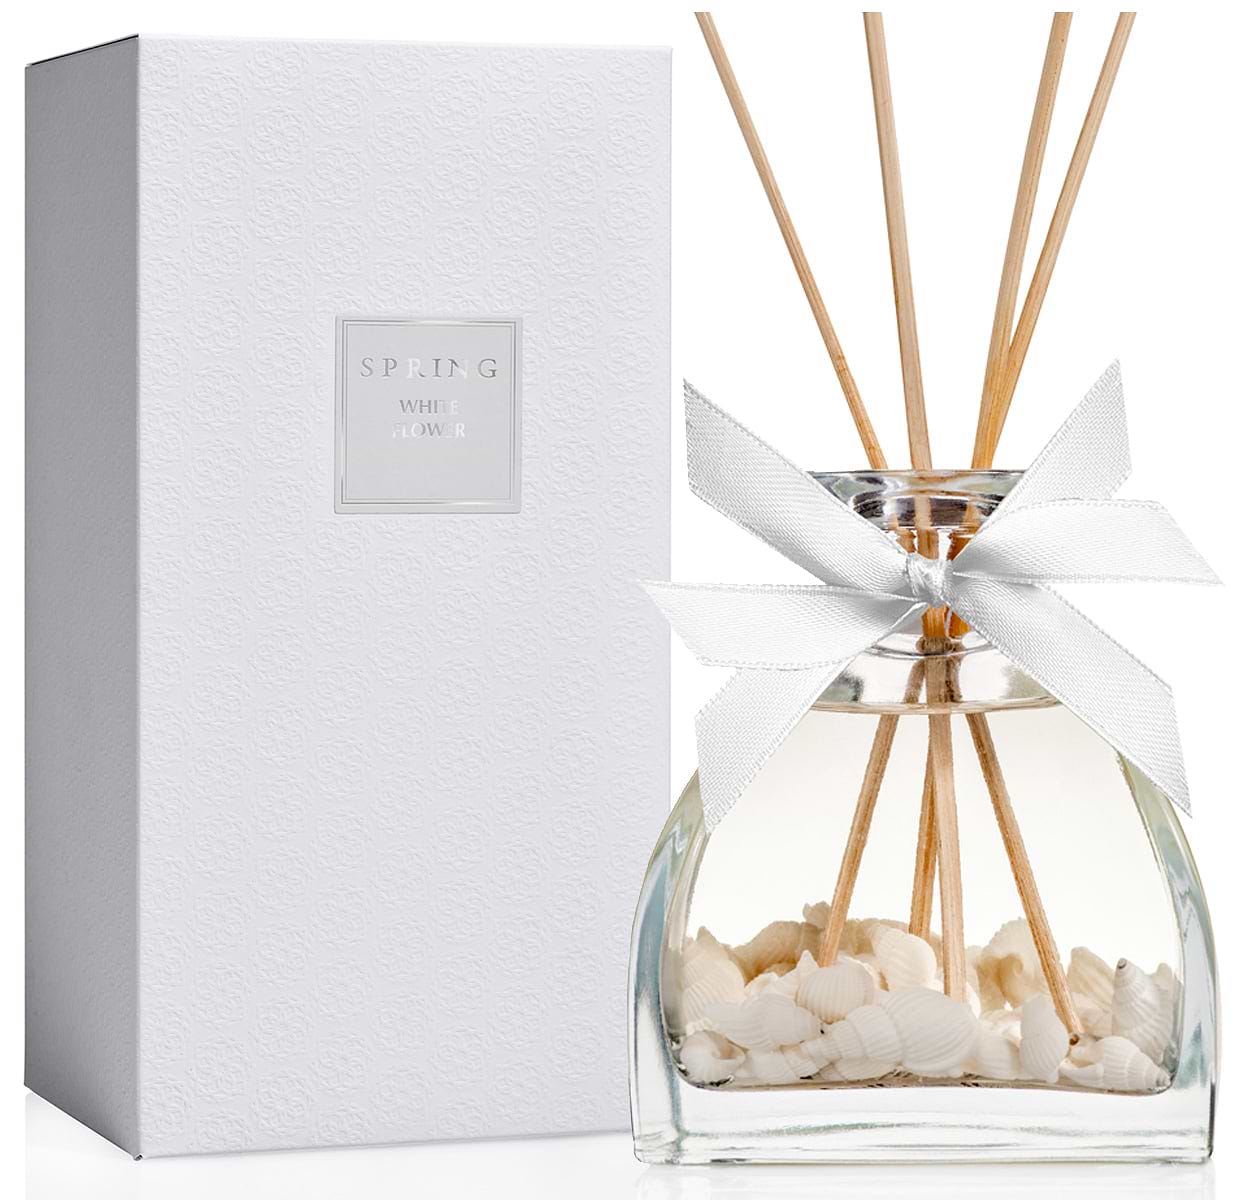 SPRING Fragrance Reed Diffuser | Large 9.47oz | Fragrance Made in France with Best Ingredients | Sea Shells design with White Flower fragrance. Ethanol free - VOC Compliant